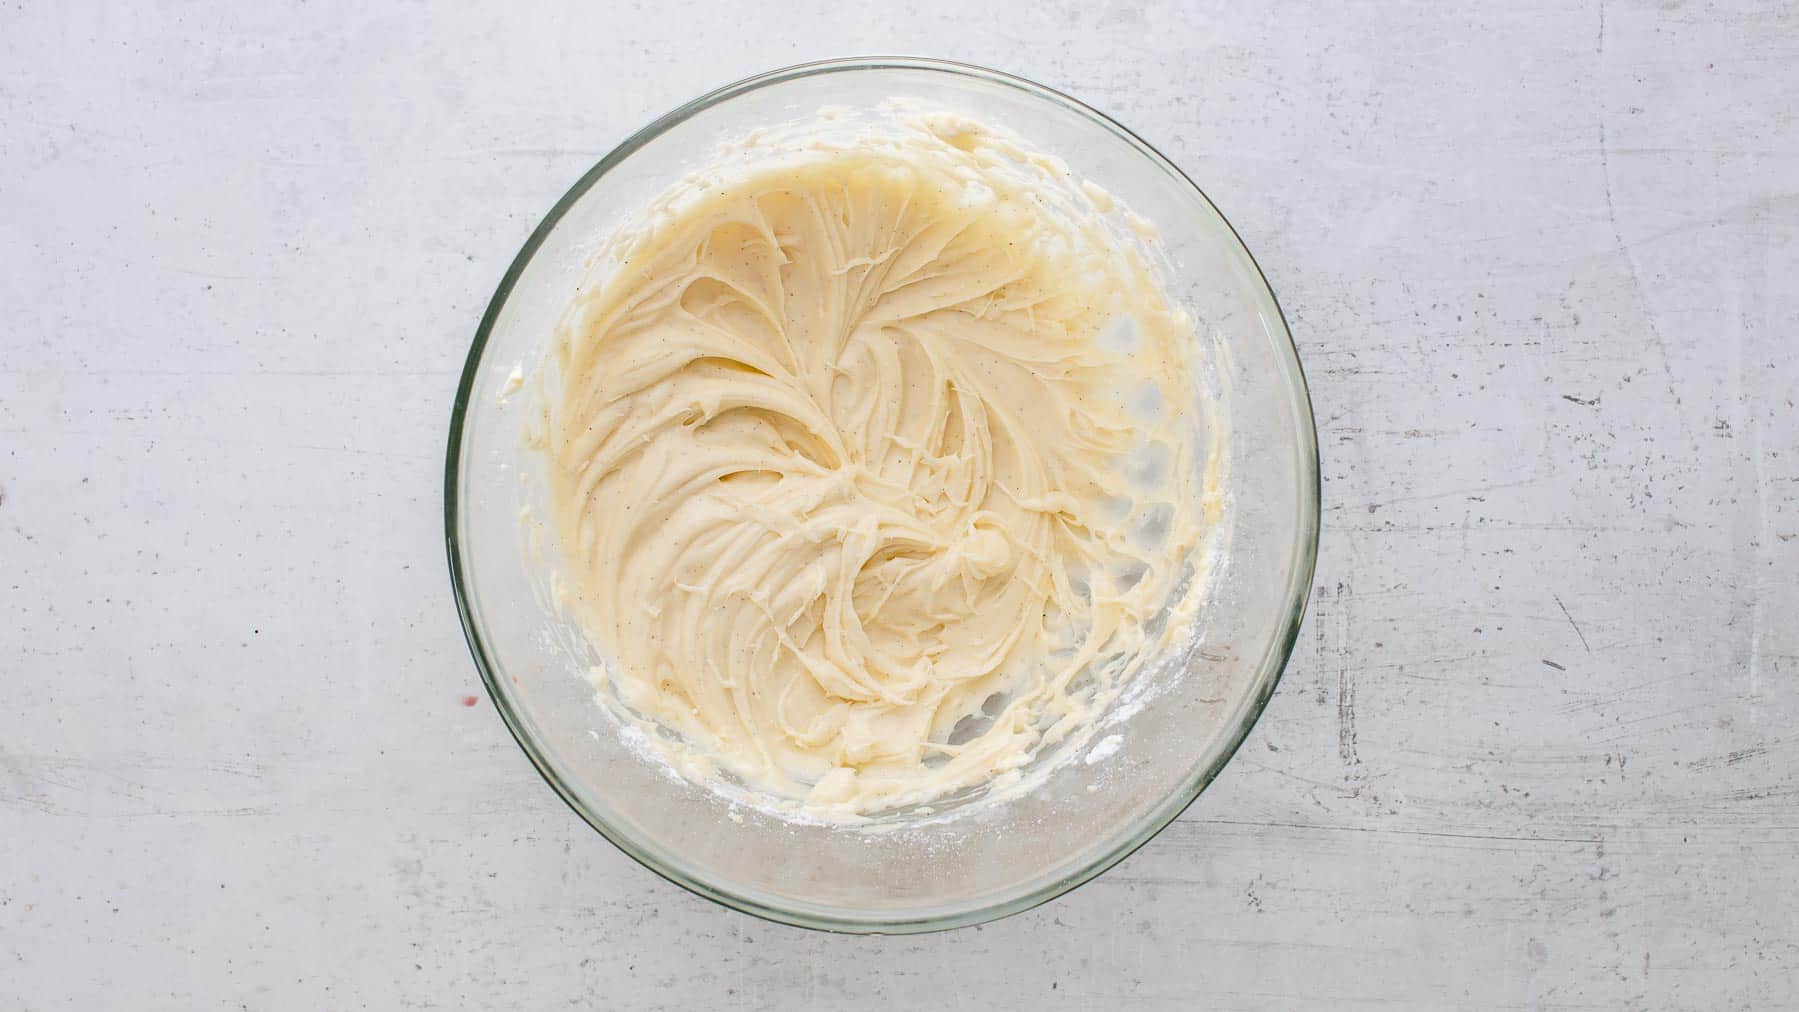 mixed cream cheese frosting in a glass bowl